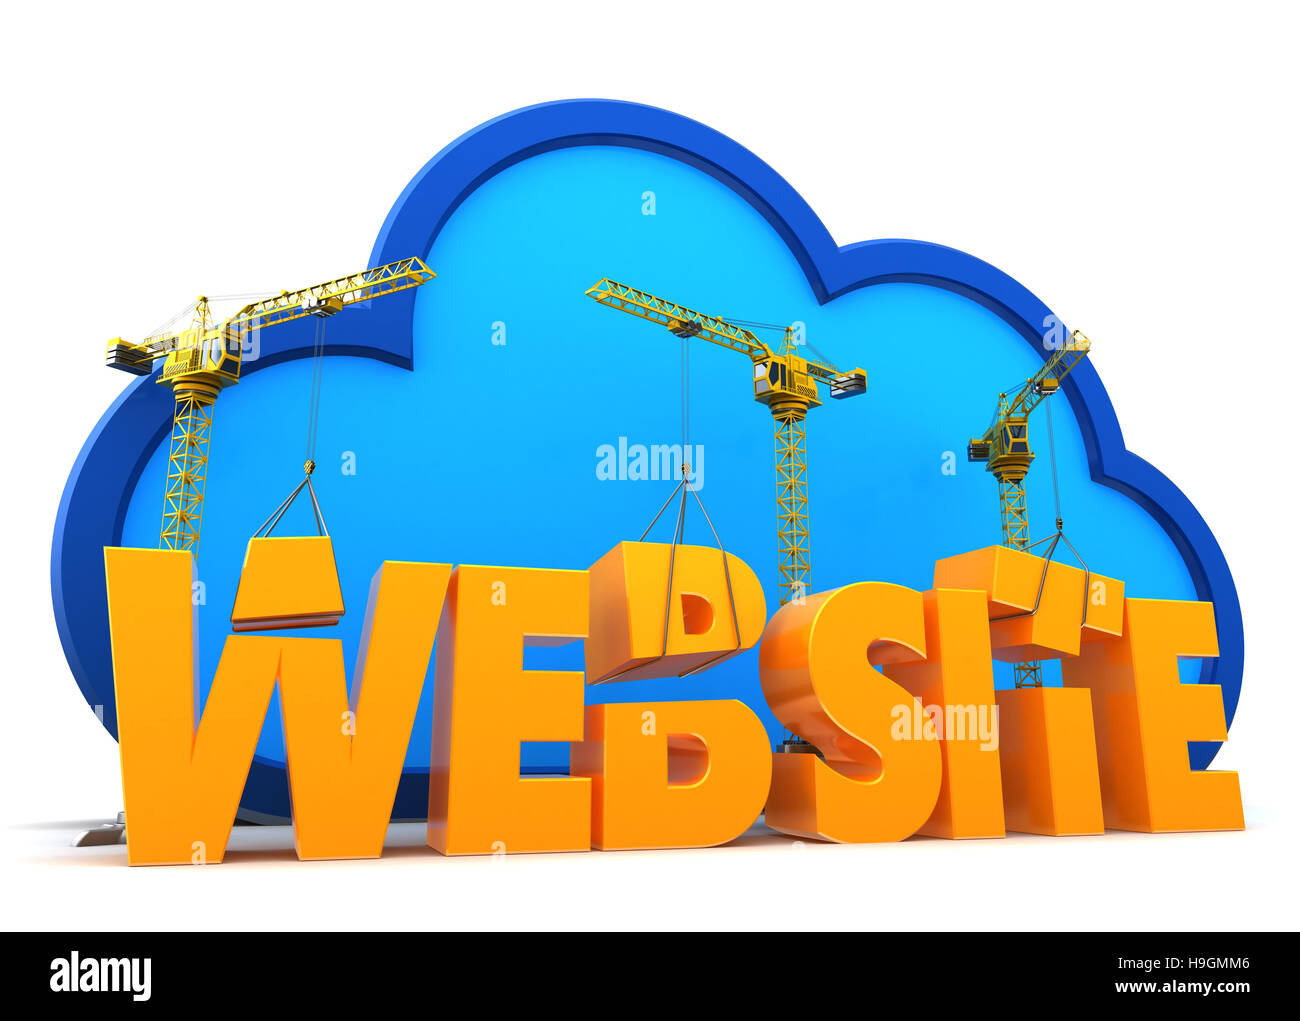 3d illustration of web site construction over cloud background Stock Photo